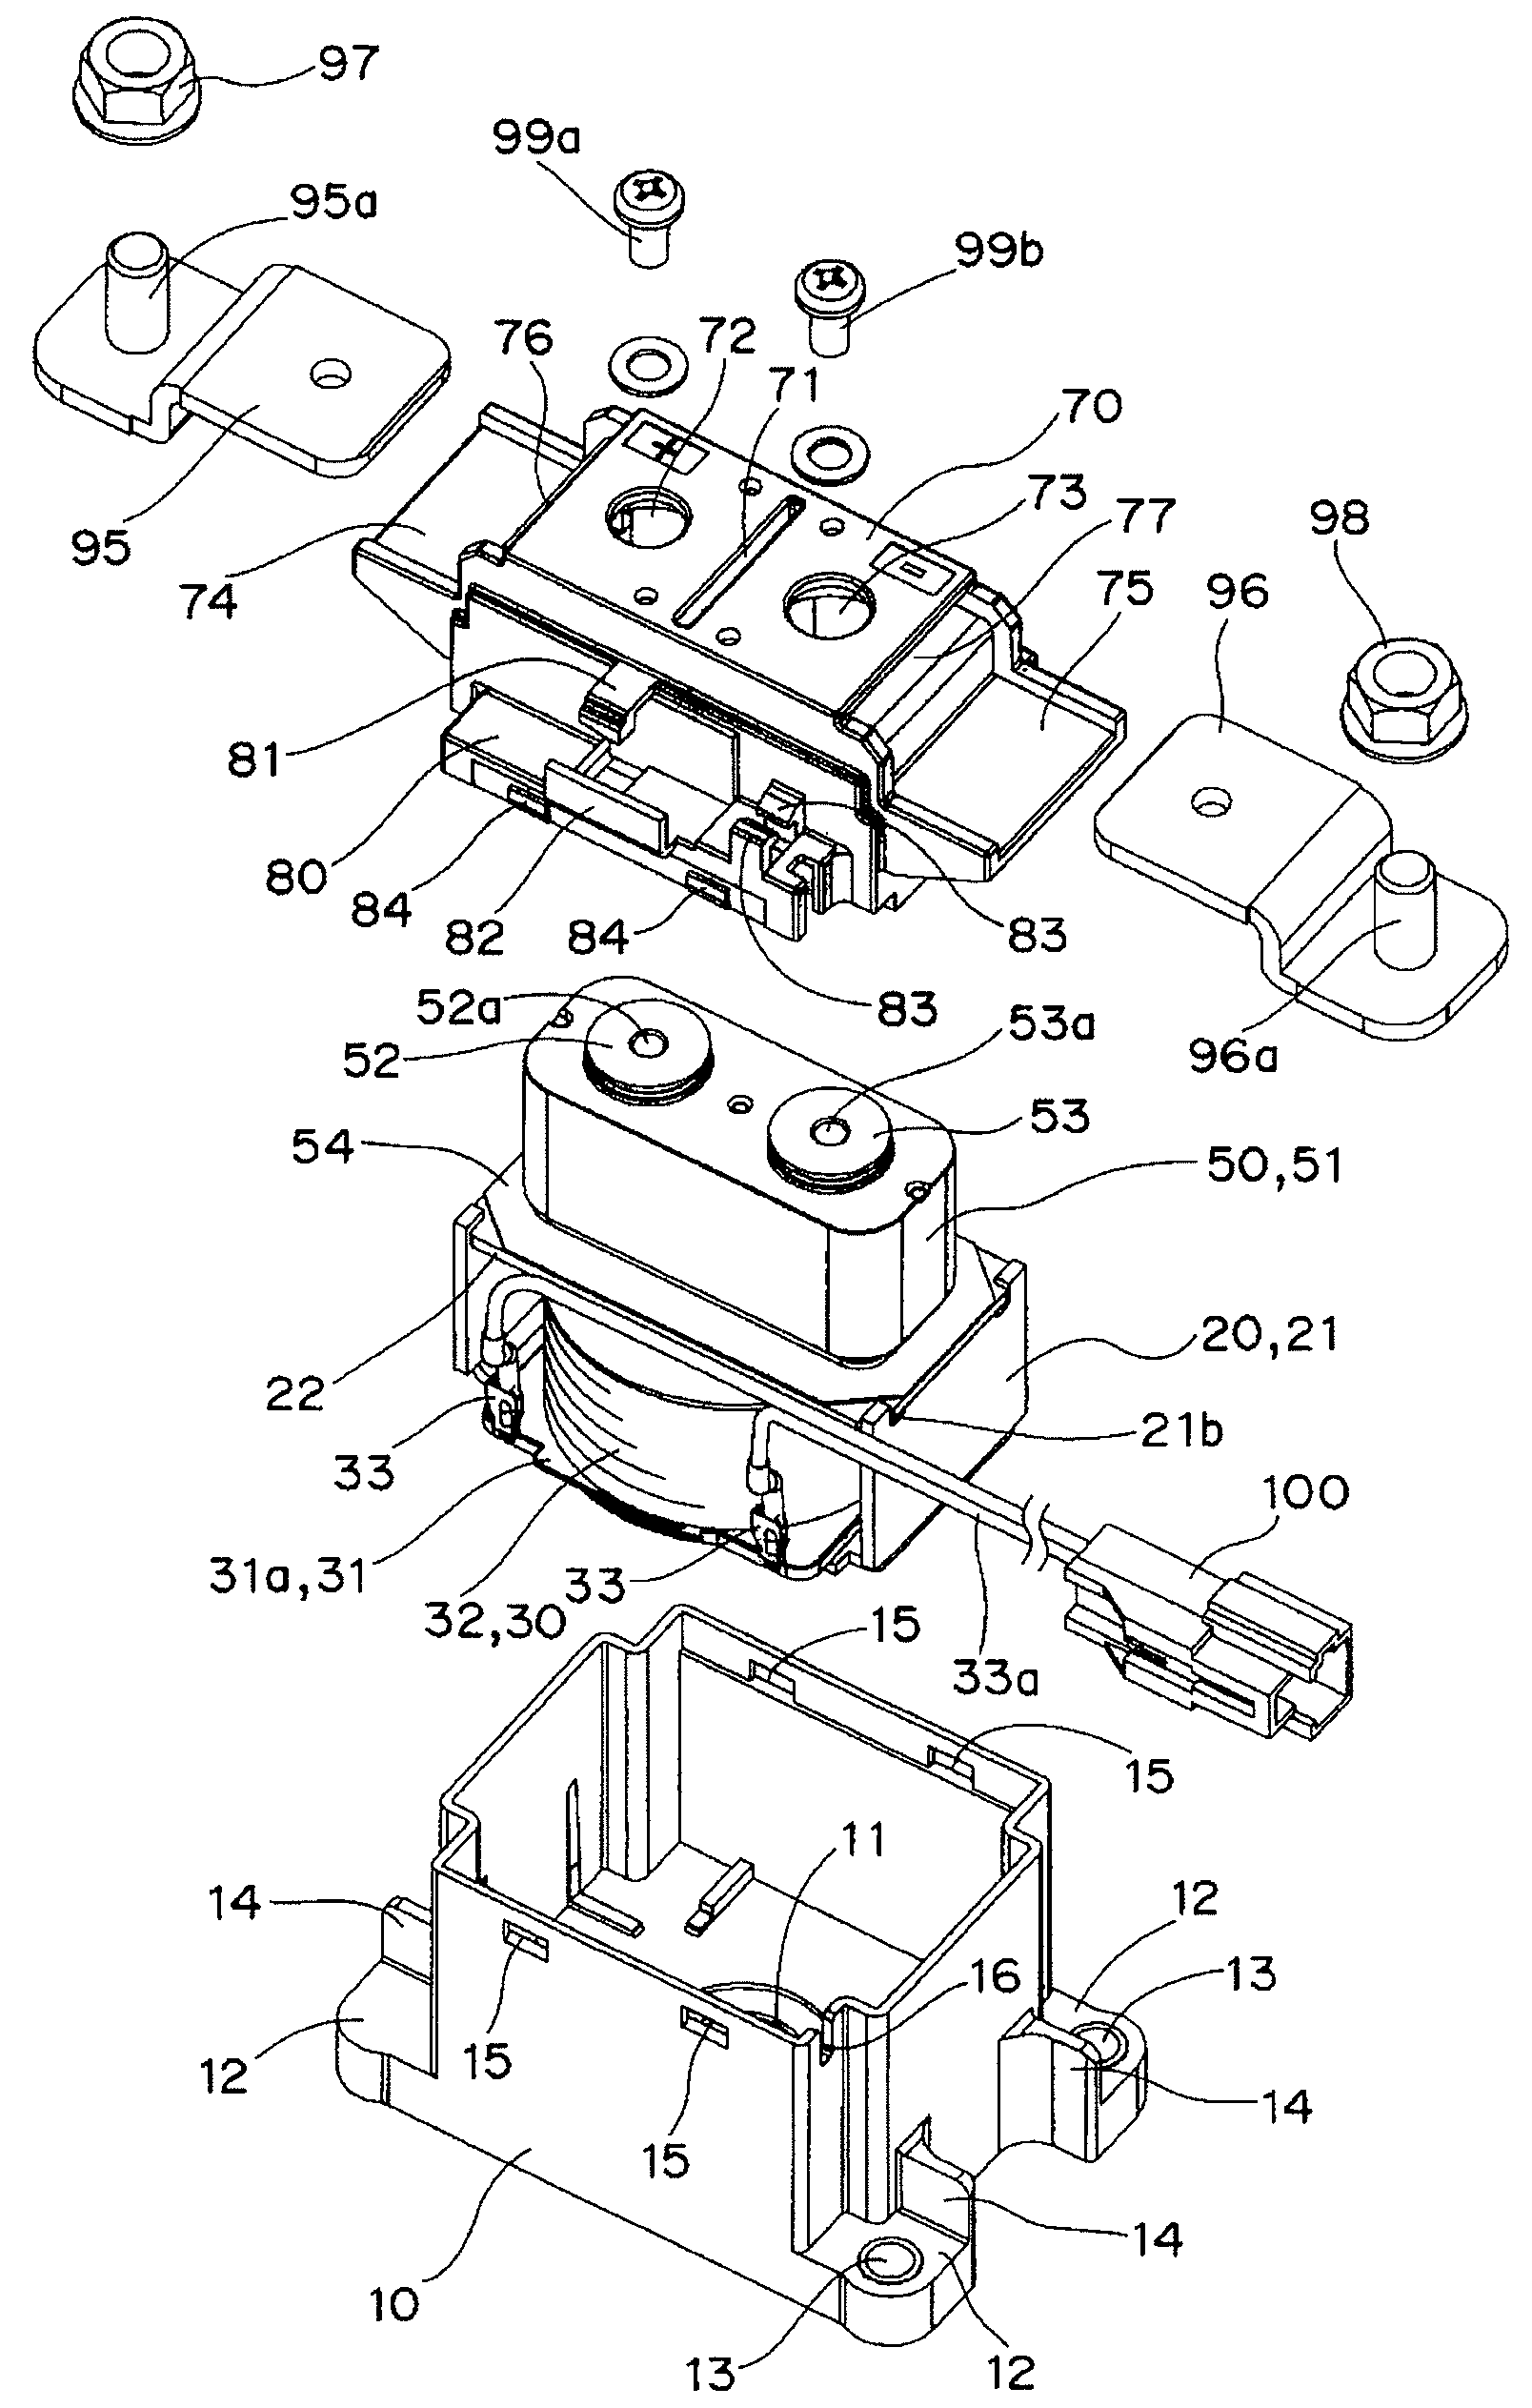 Contact device